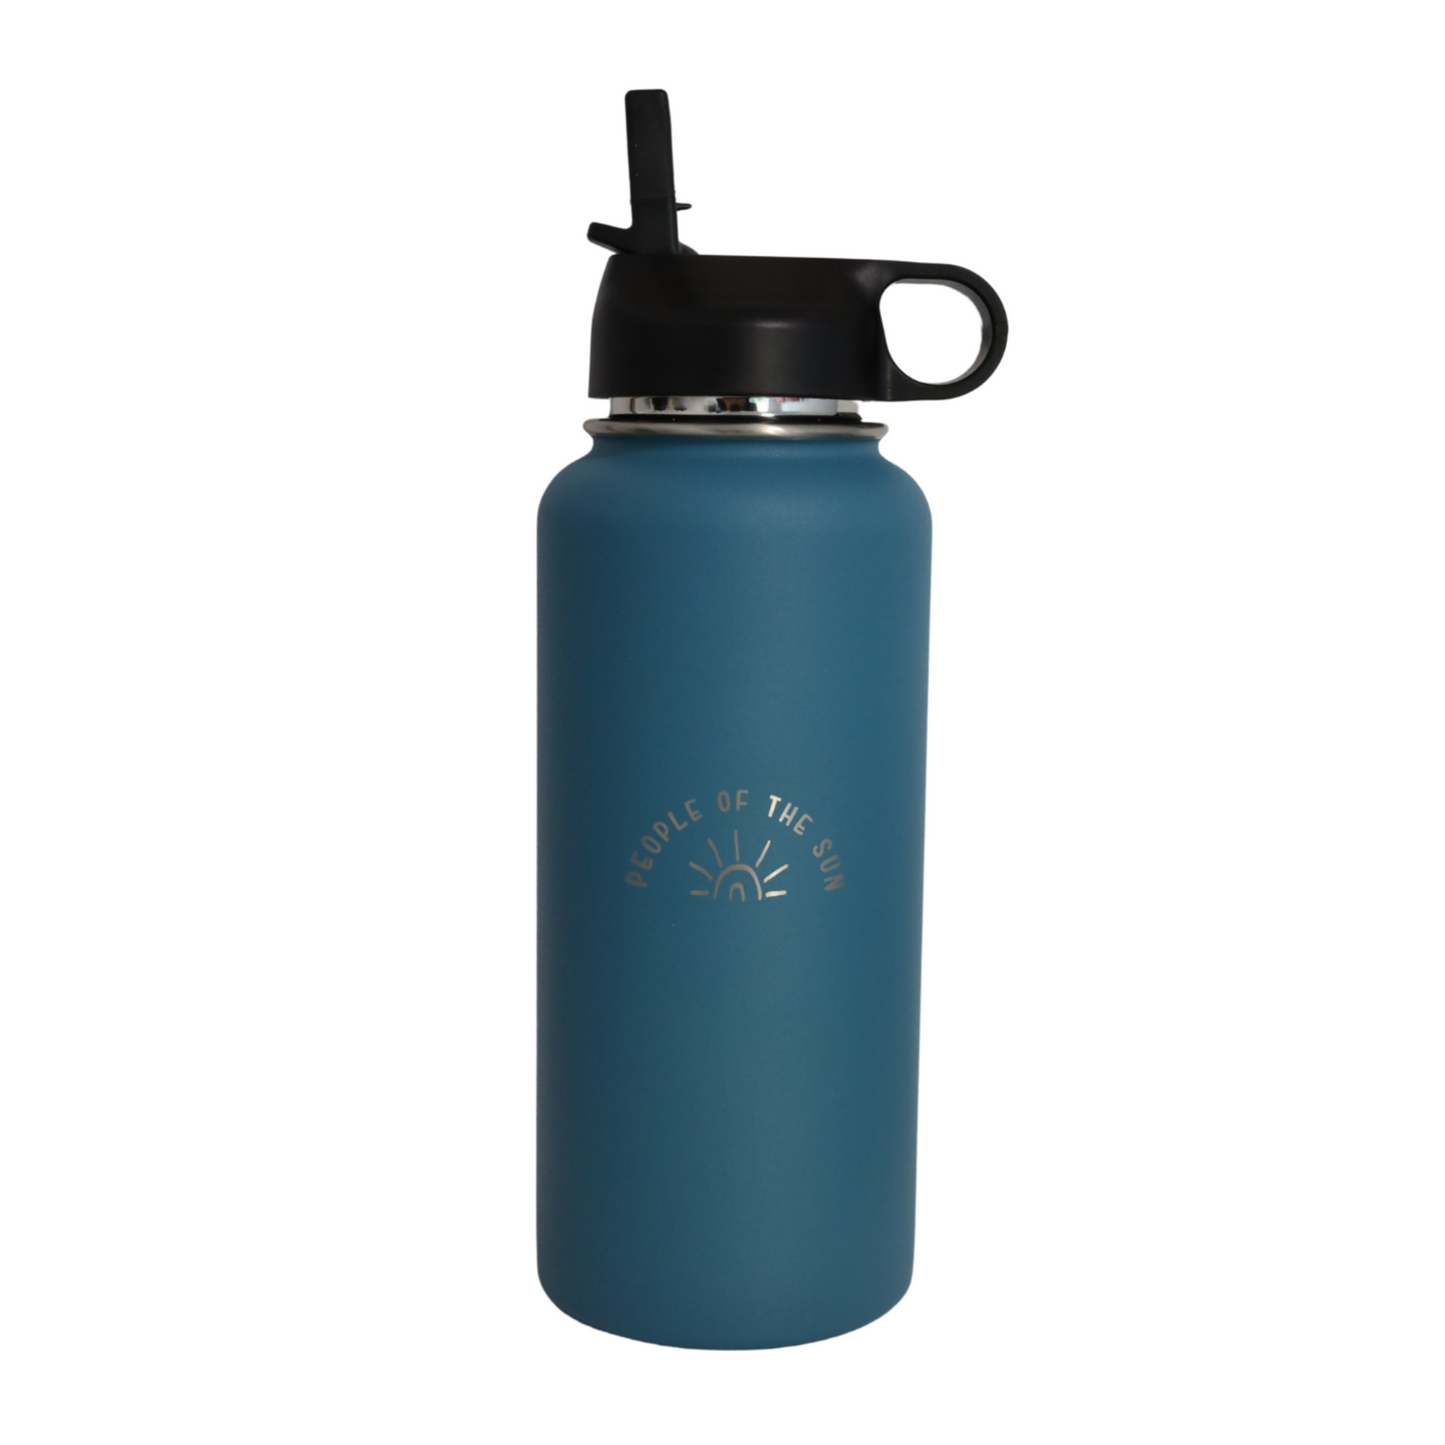 950ml Insulated Water Bottle with LOGO